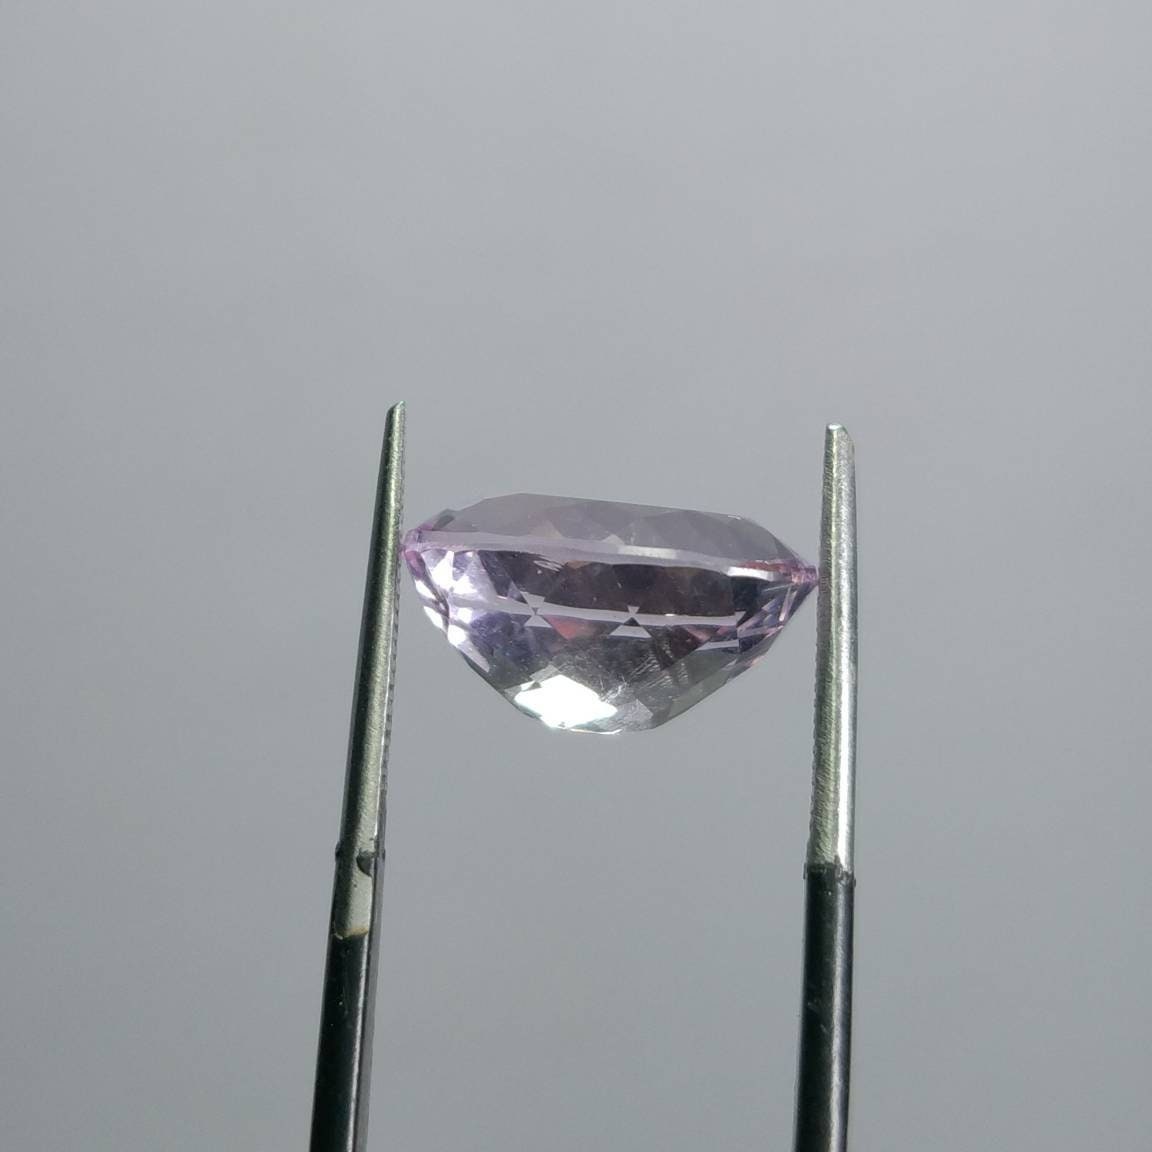 ARSAA GEMS AND MINERALSNatural fine quality beautiful 6.5 carats VV clarity faceted oval shape amethyst gem - Premium  from ARSAA GEMS AND MINERALS - Just $13.00! Shop now at ARSAA GEMS AND MINERALS